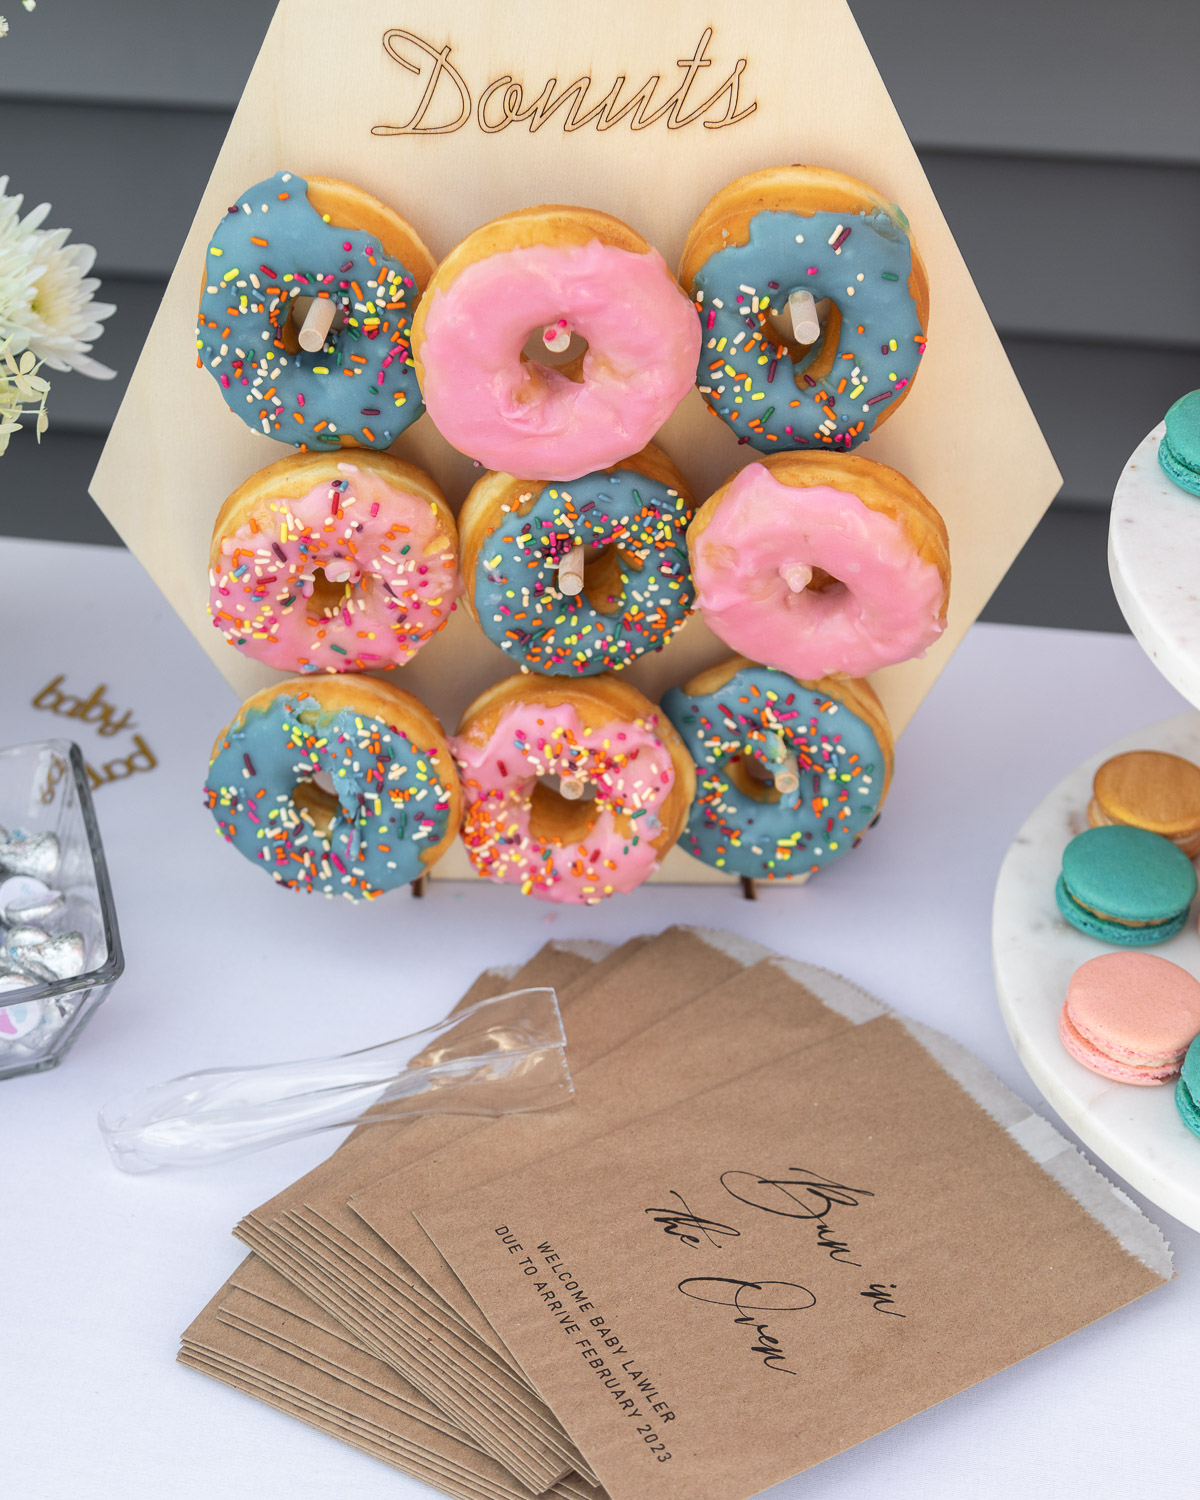 lawler-gender-reveal-party-donut-wall-the-glamorous-gal-blog